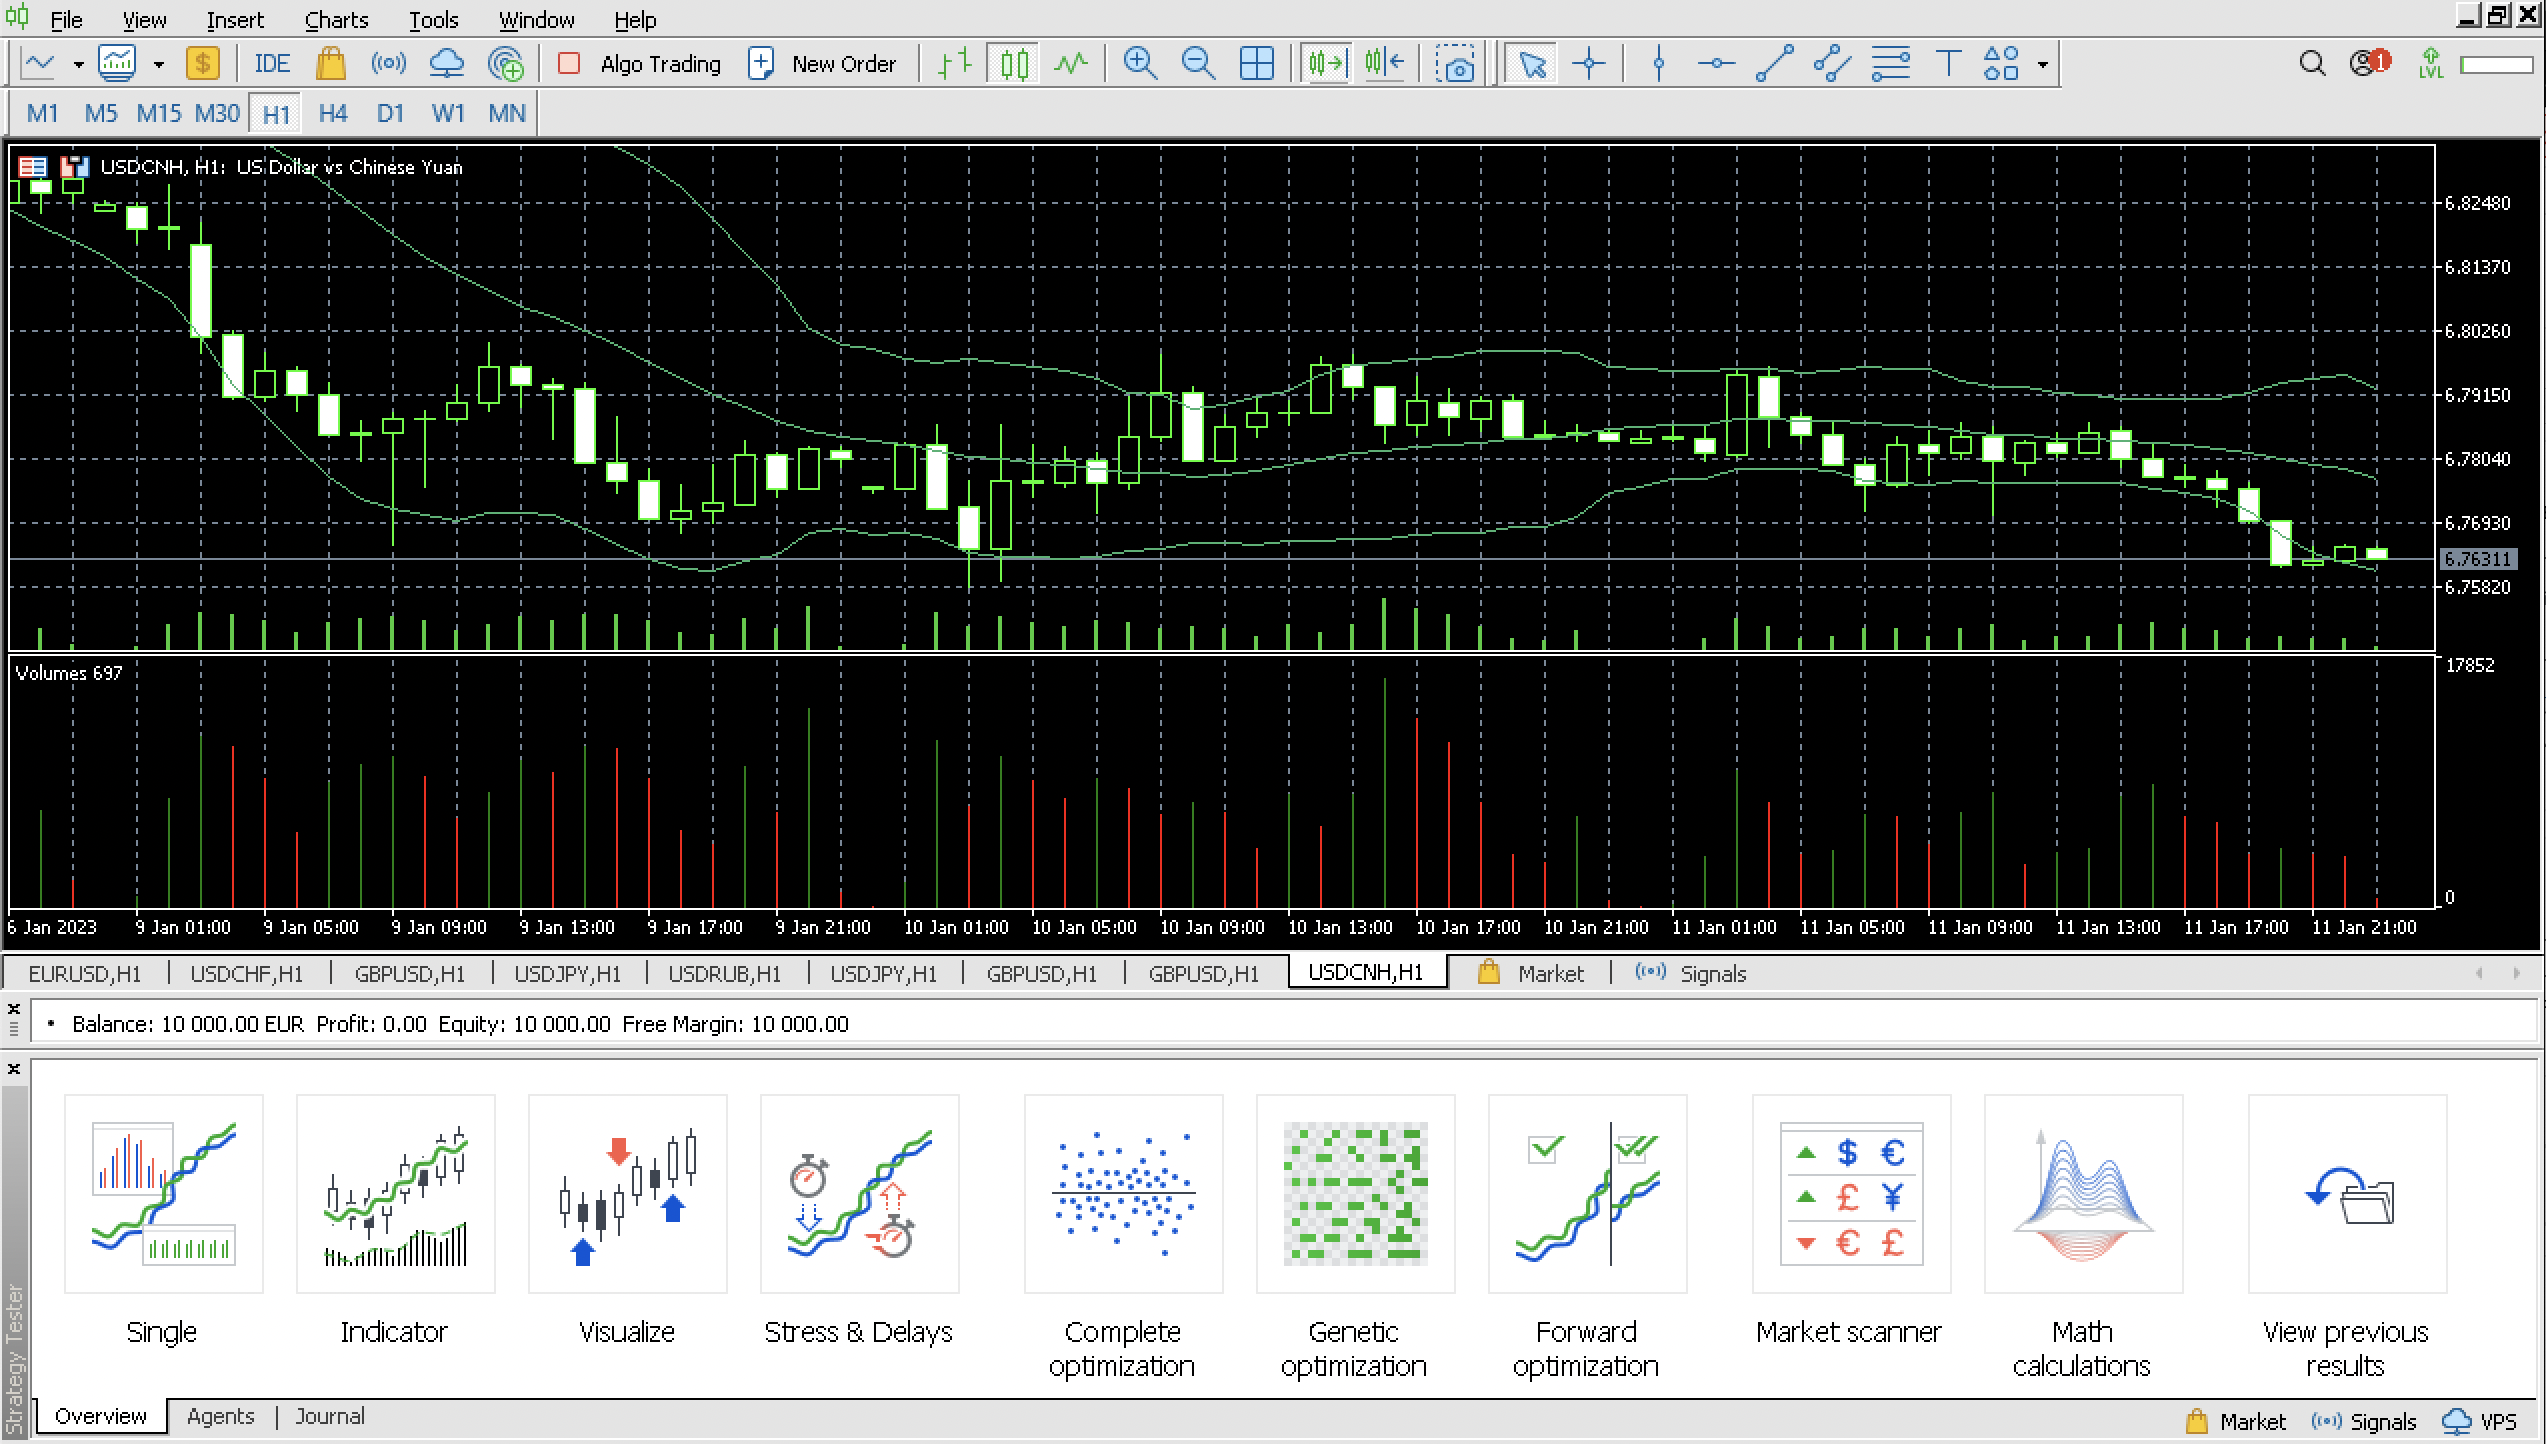 MetaTrader 5 trading software and its features